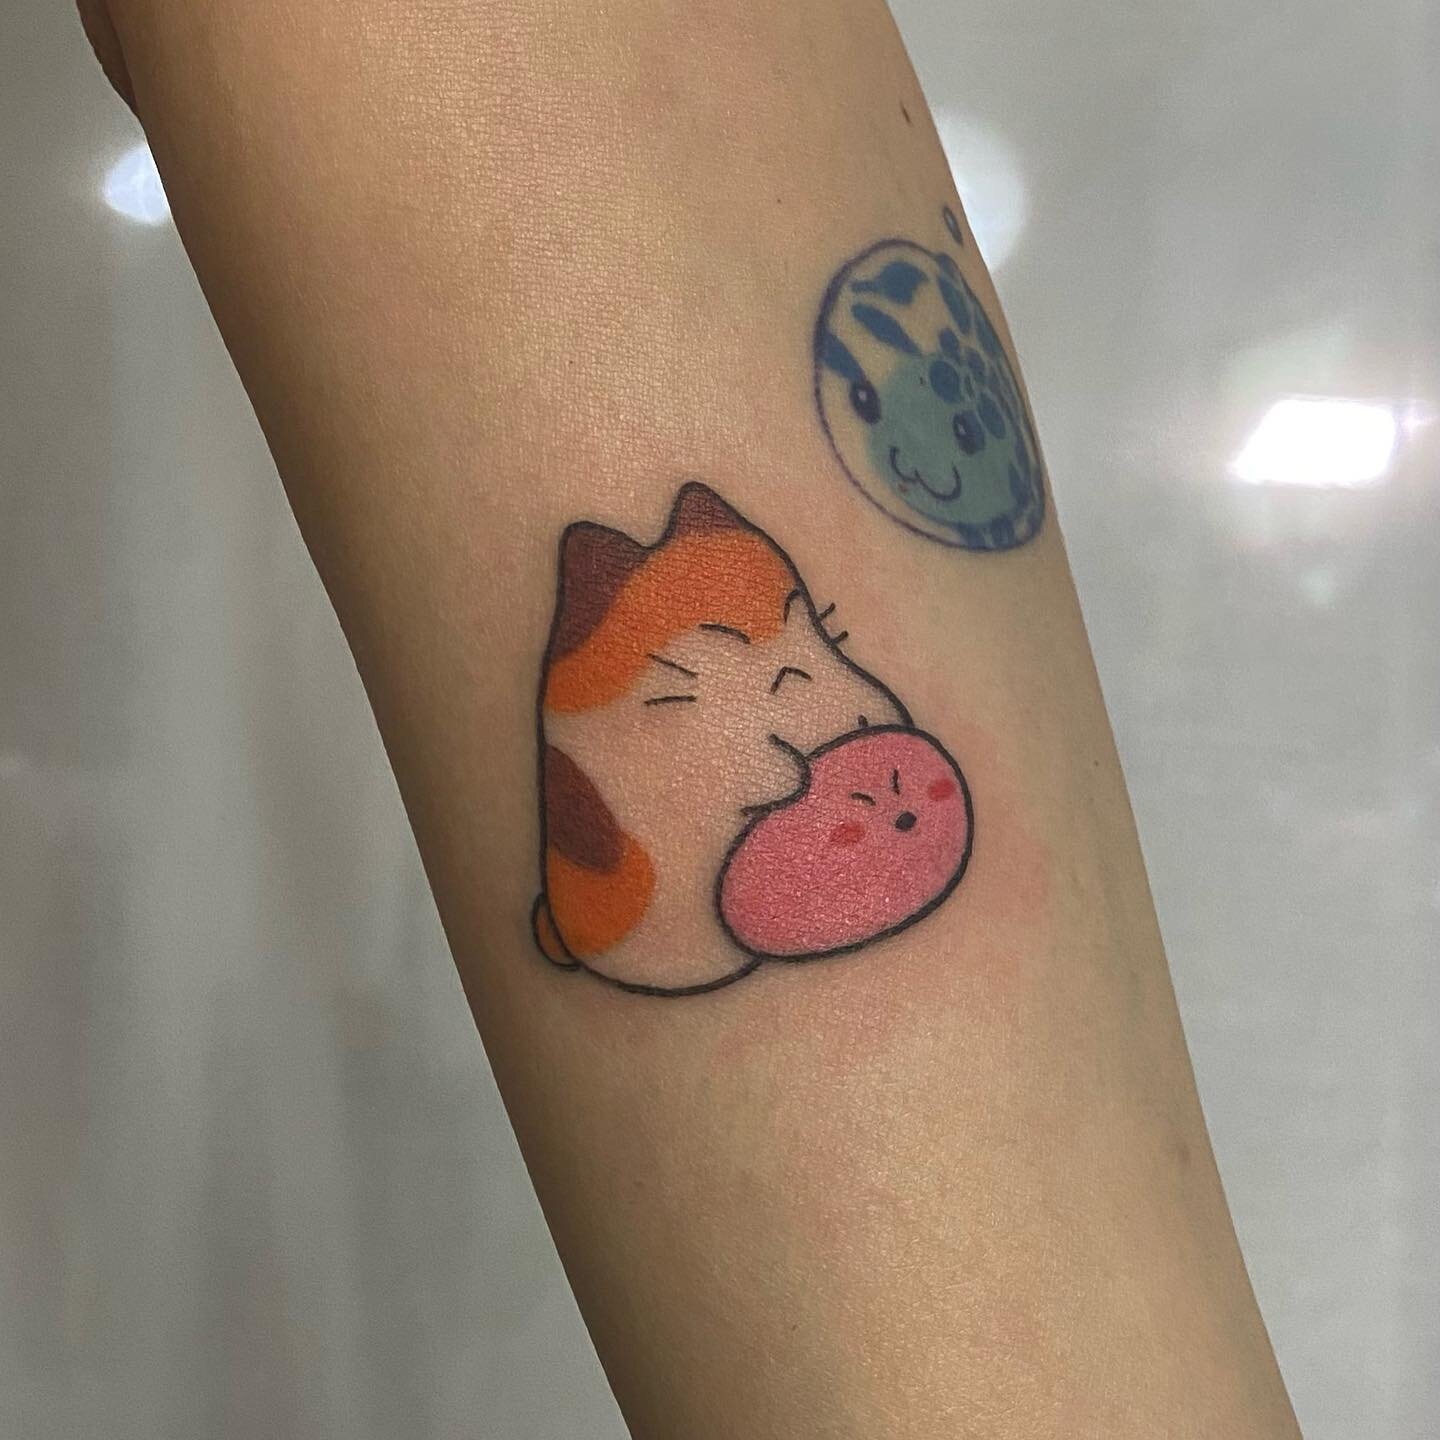 Kirb &amp; ghibli tats from the recent-ish flash days @strangemmmaker and I did :) Tysm to everyone that came out we are excited to do more like thissssss!
.
.
.
#vancouvertattoo #vancouvertattooartist  #vancouver #qttr #queertattooartist #contempora